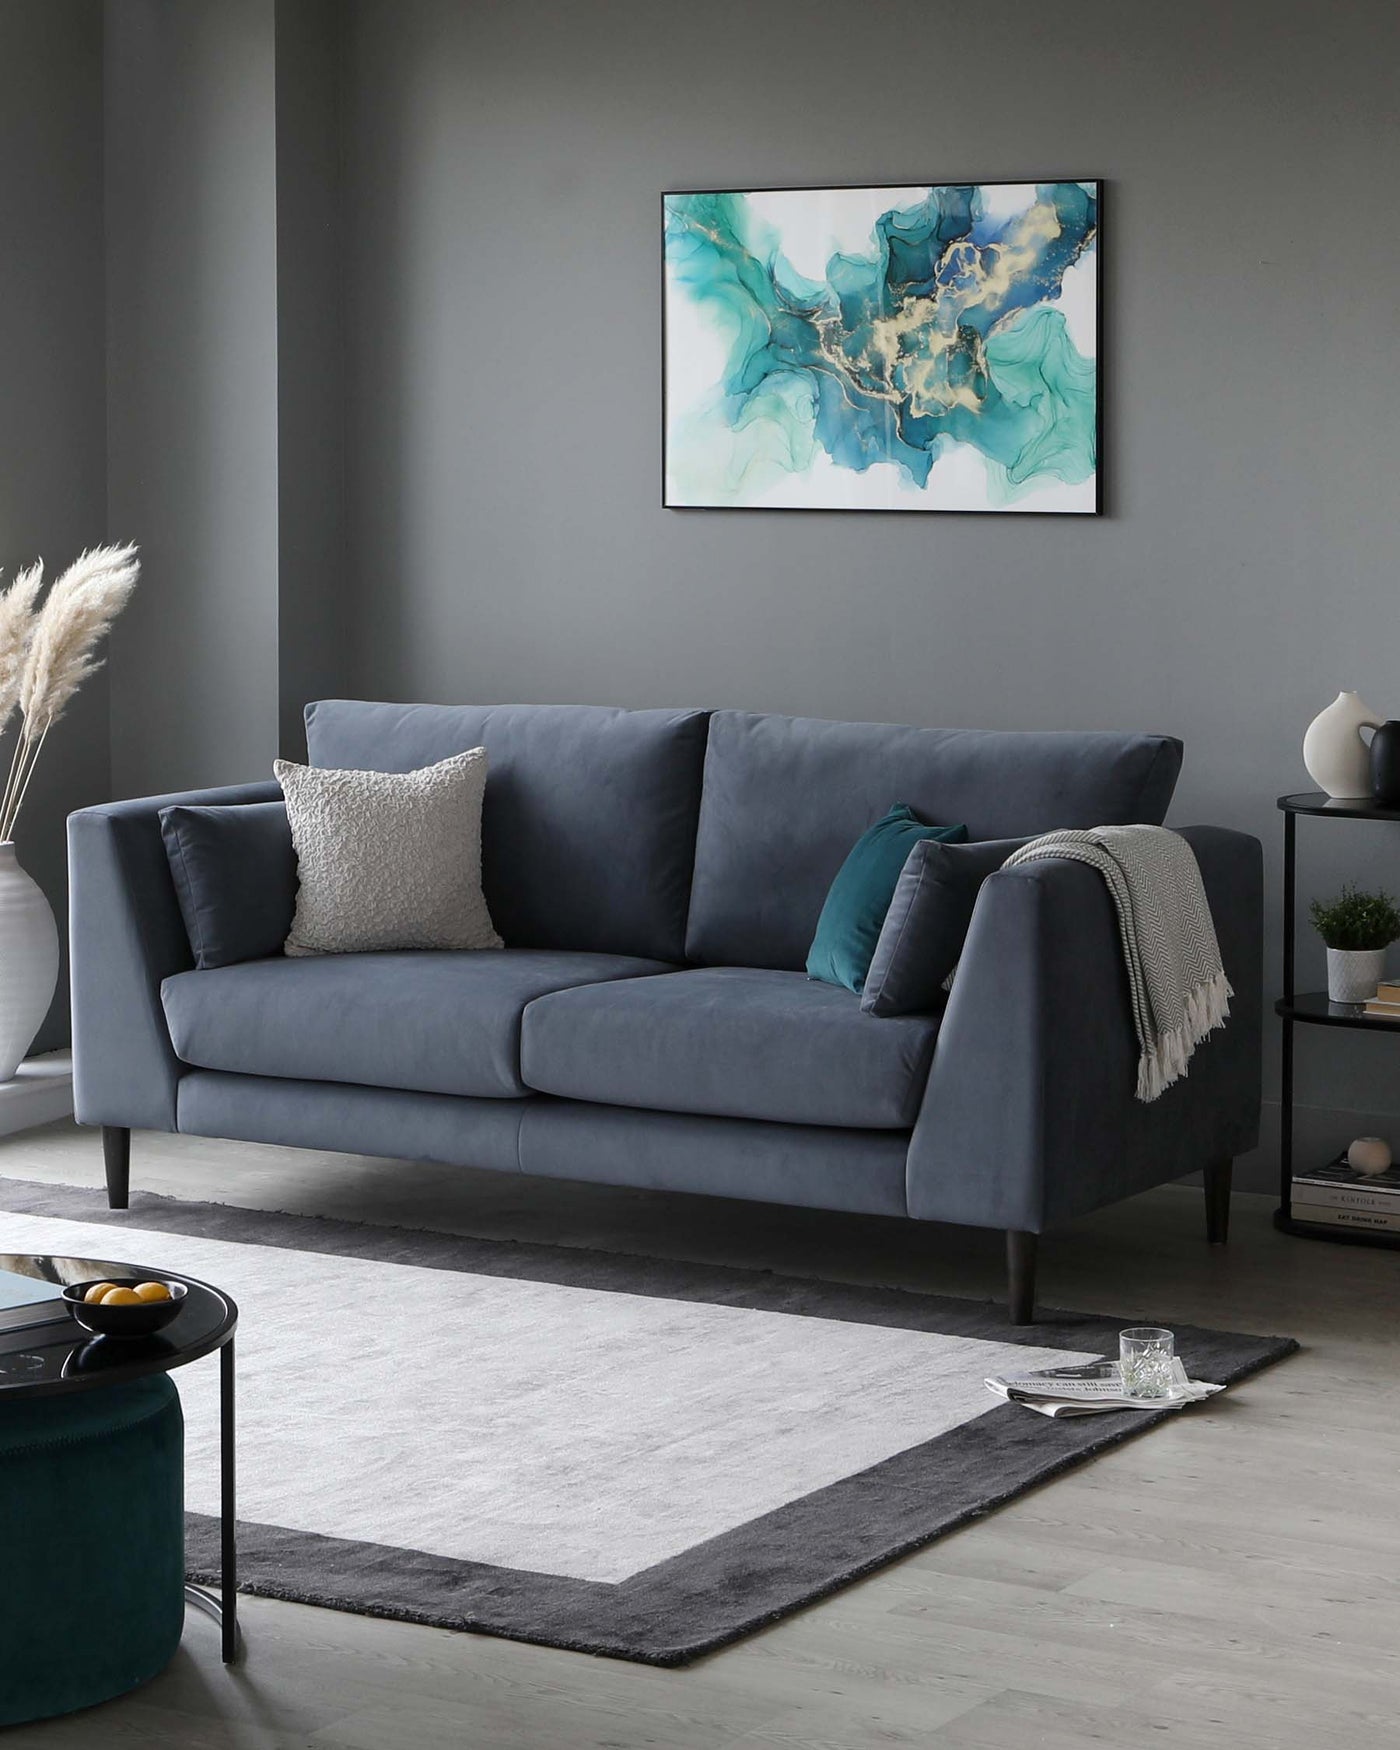 Modern three-seater sofa with plush cushions in a muted grey upholstery, accented with a mix of throw pillows in white and teal. A minimalist black metal round coffee table sits adjacent to the sofa, complemented by a dark teal round ottoman with a velvet-like finish. An off-white and grey area rug anchors the space, and a sleek black side table with shelves holds small decorative items.